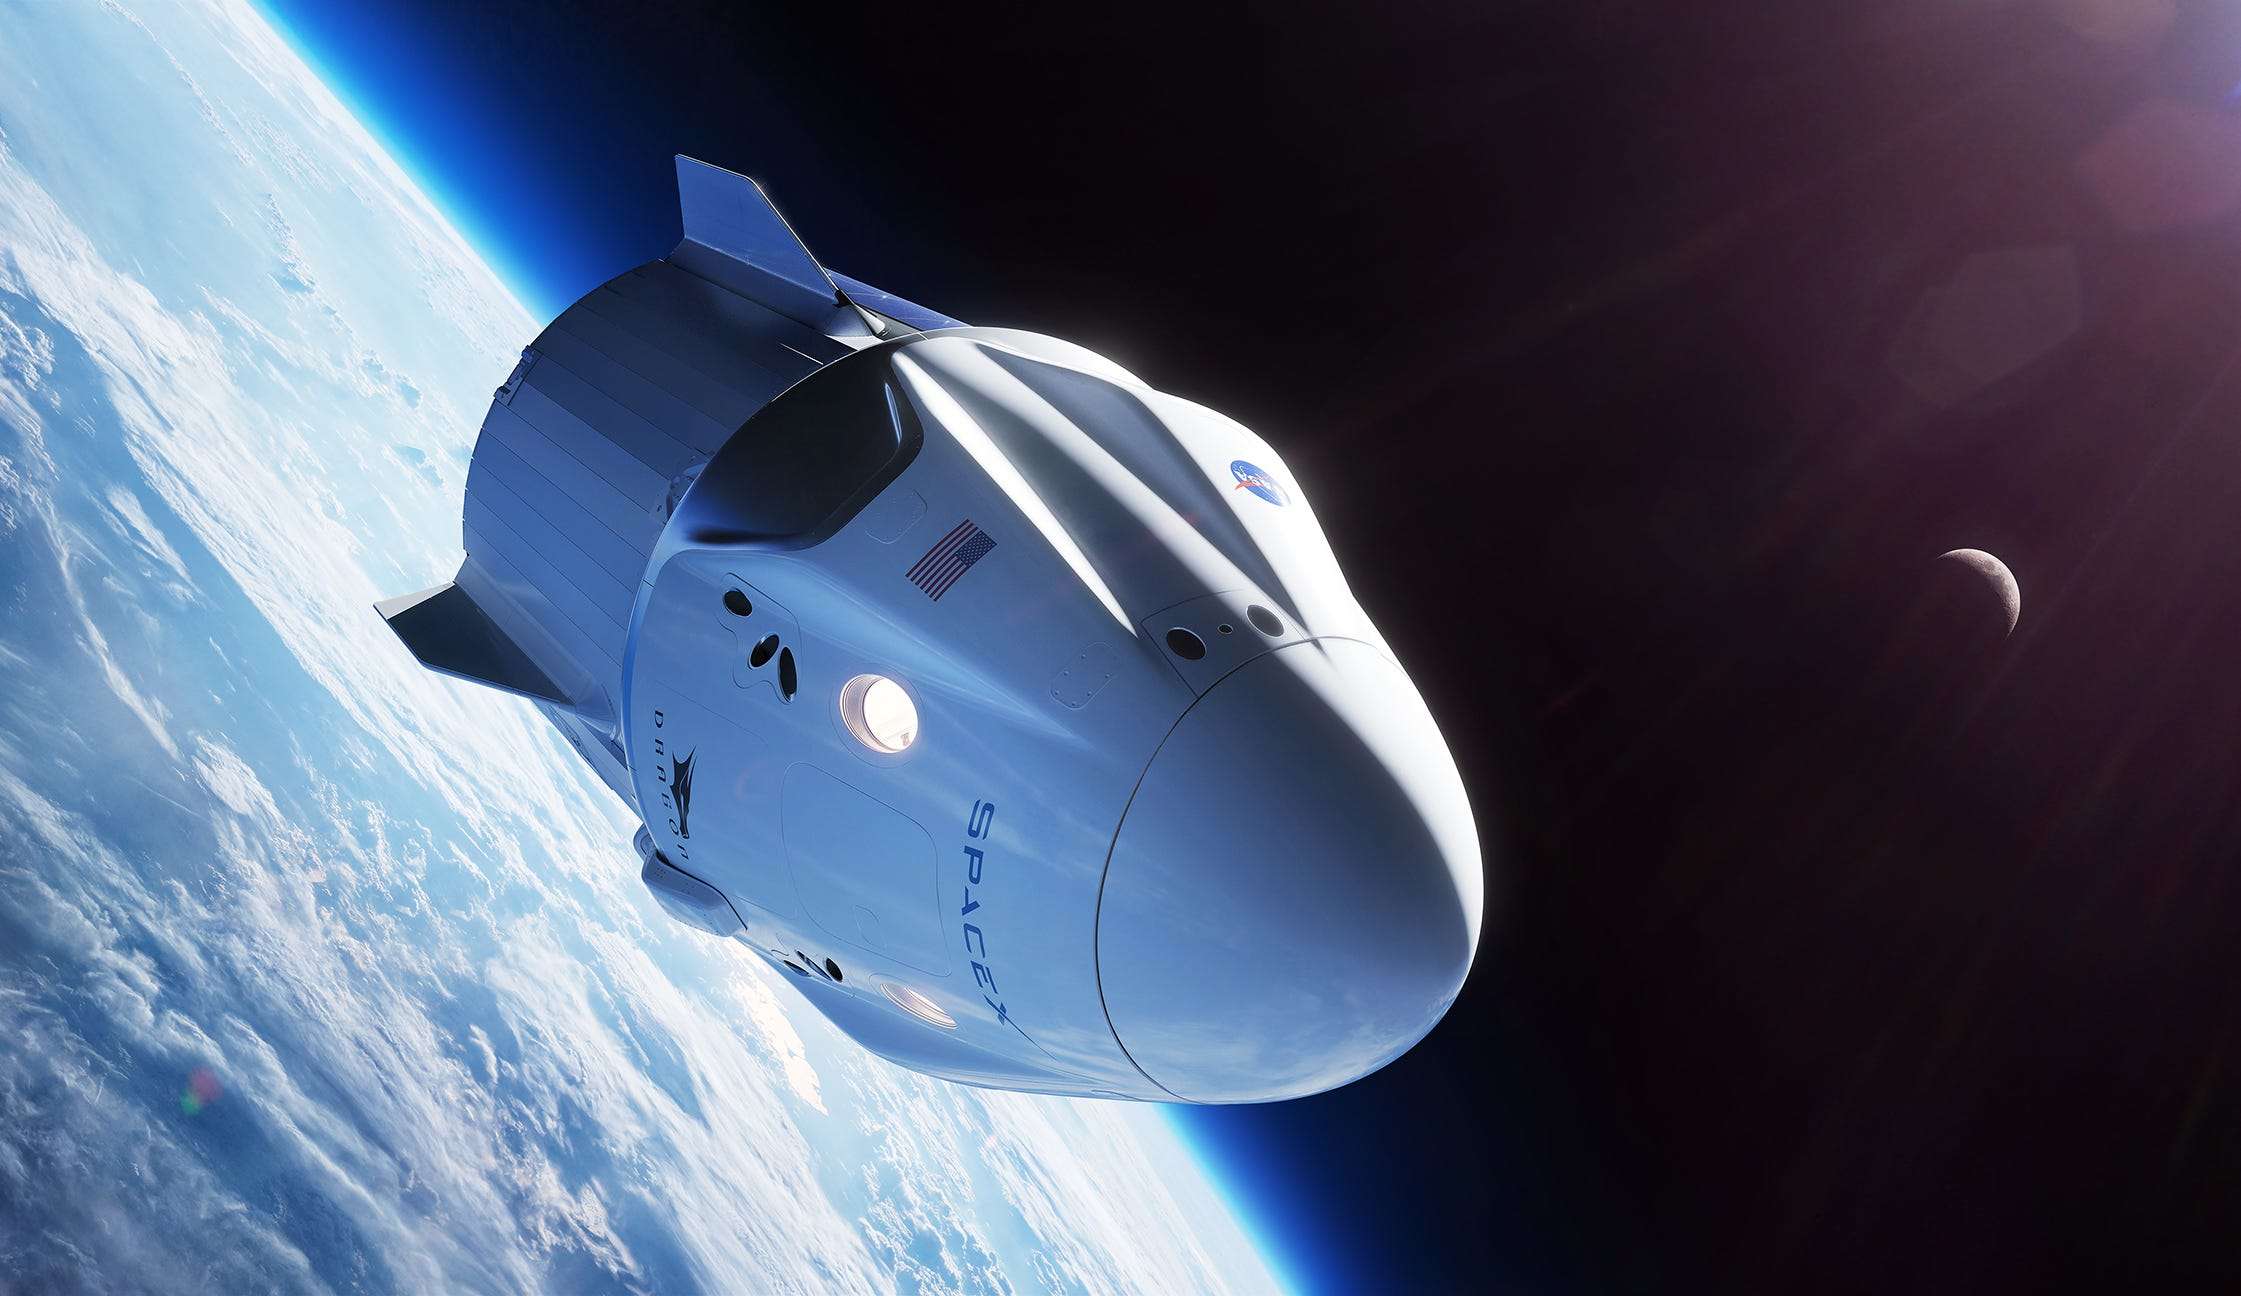 Watch Live 2 Nasa Astronauts Just Made A Fiery Return To Earth Aboard Spacex S New Crew Dragon Ship Business Insider India